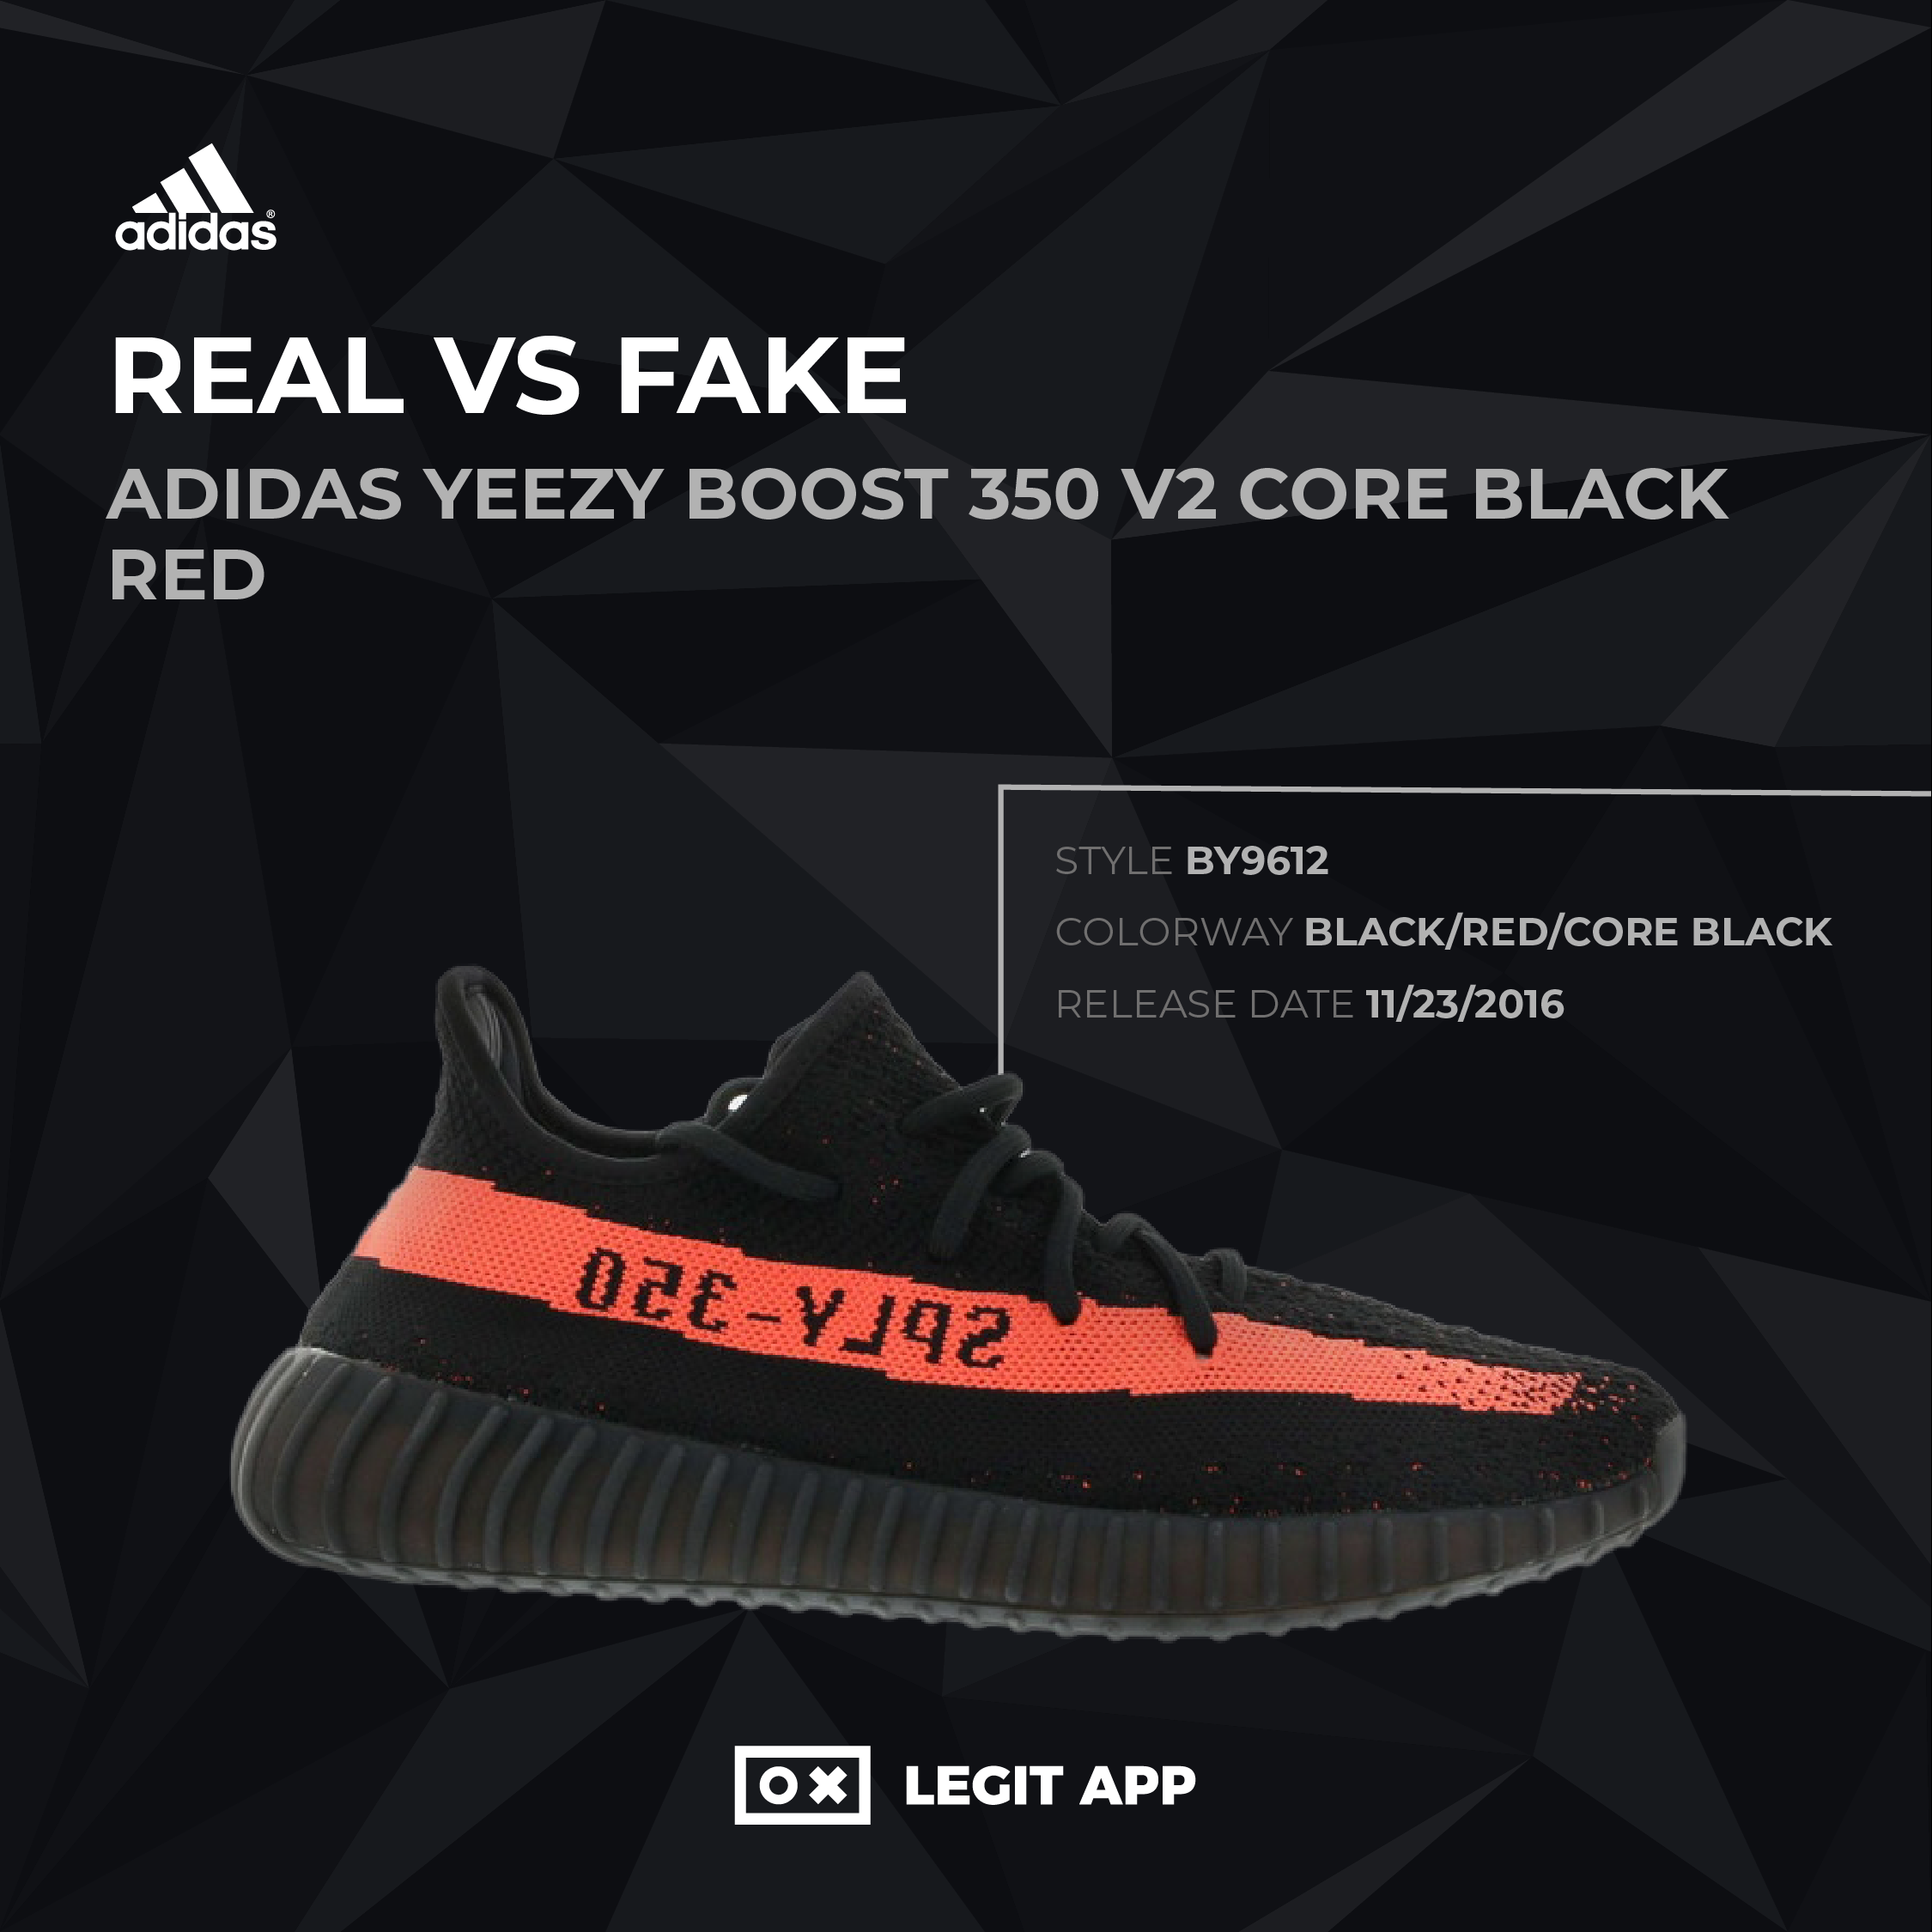 yeezy boost core black red